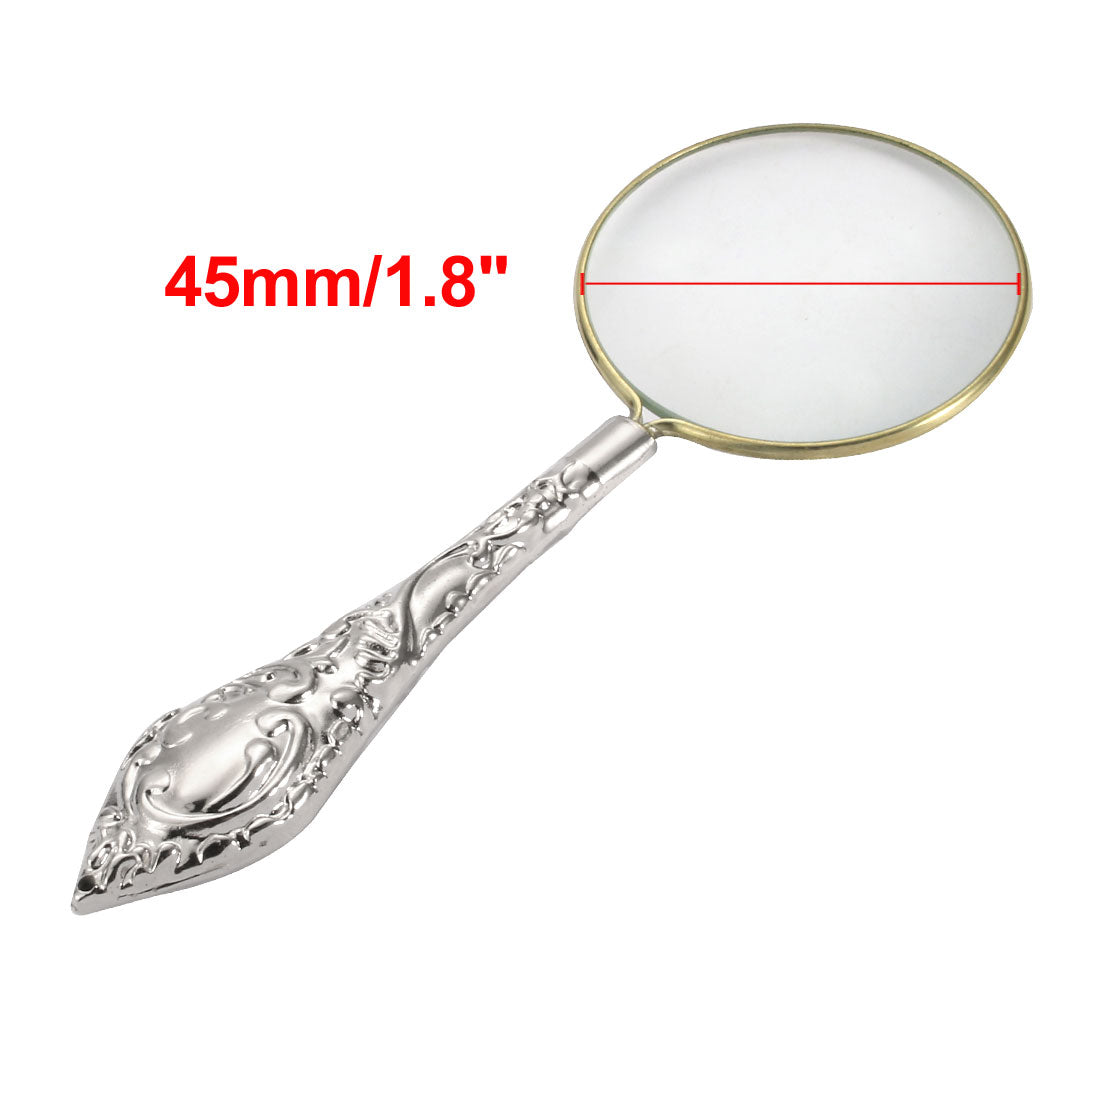 uxcell Uxcell Carved Handheld 5X Magnifier Magnifying Glass Illuminated Magnifier Silver Tone